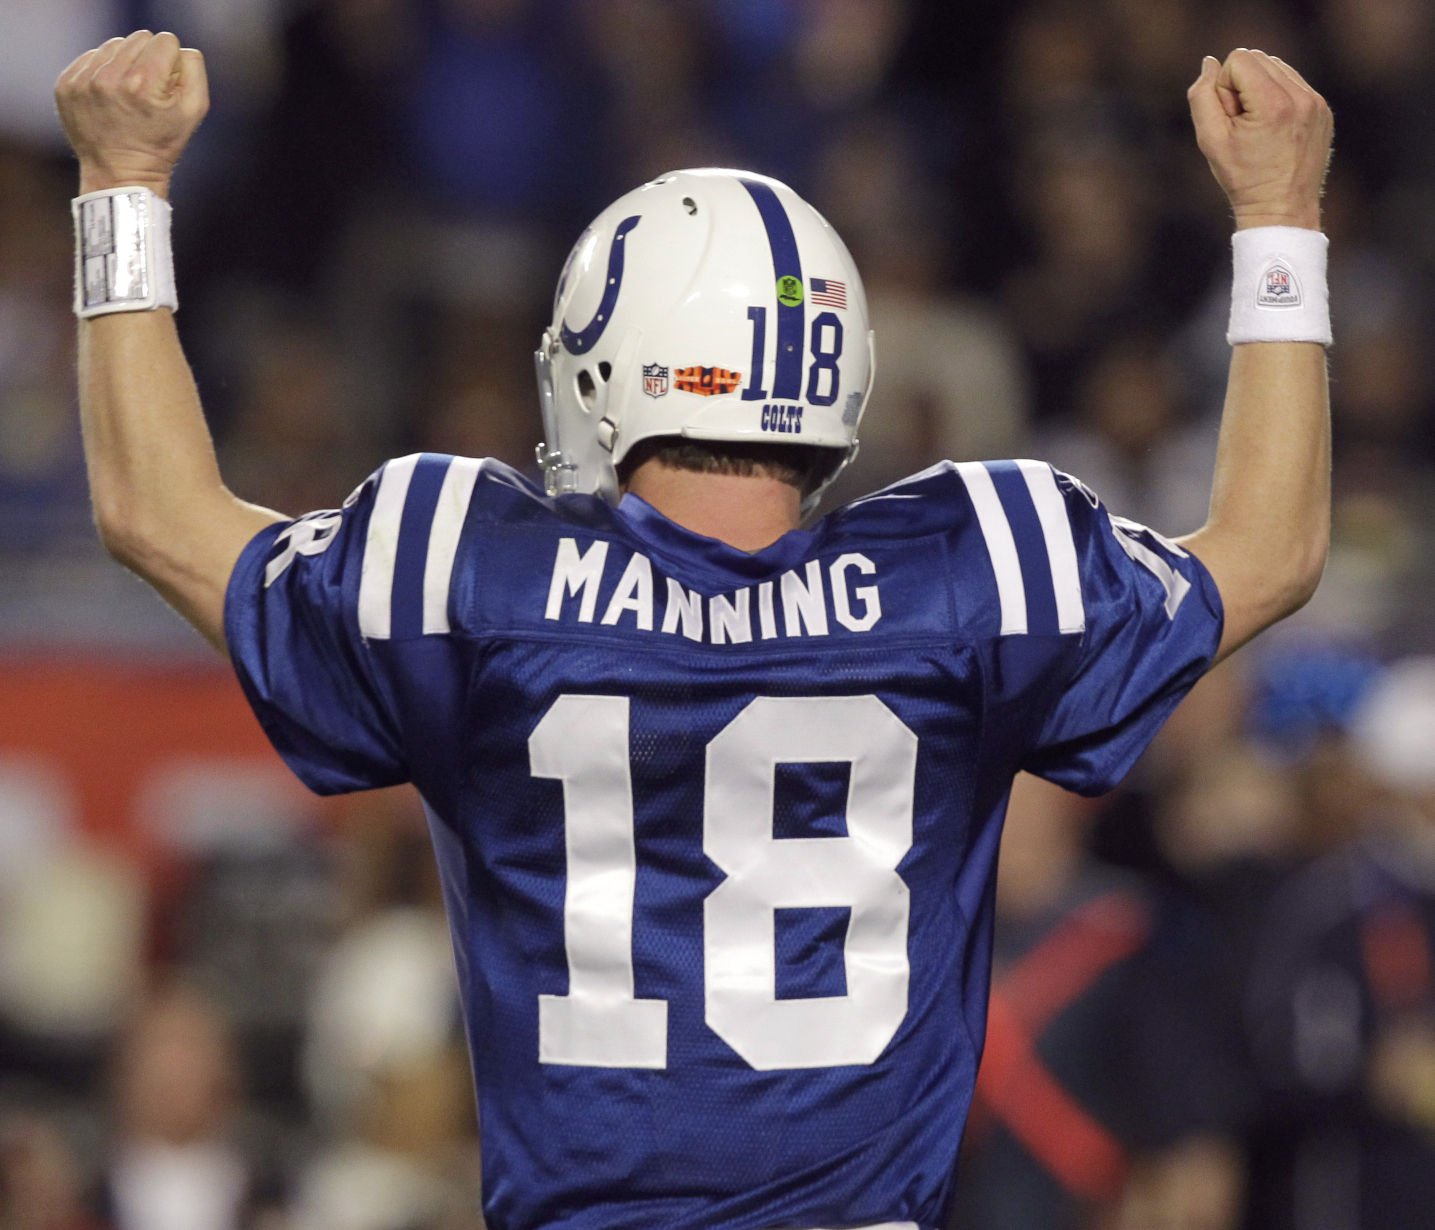 Colts announce plans for 2-day Manning 